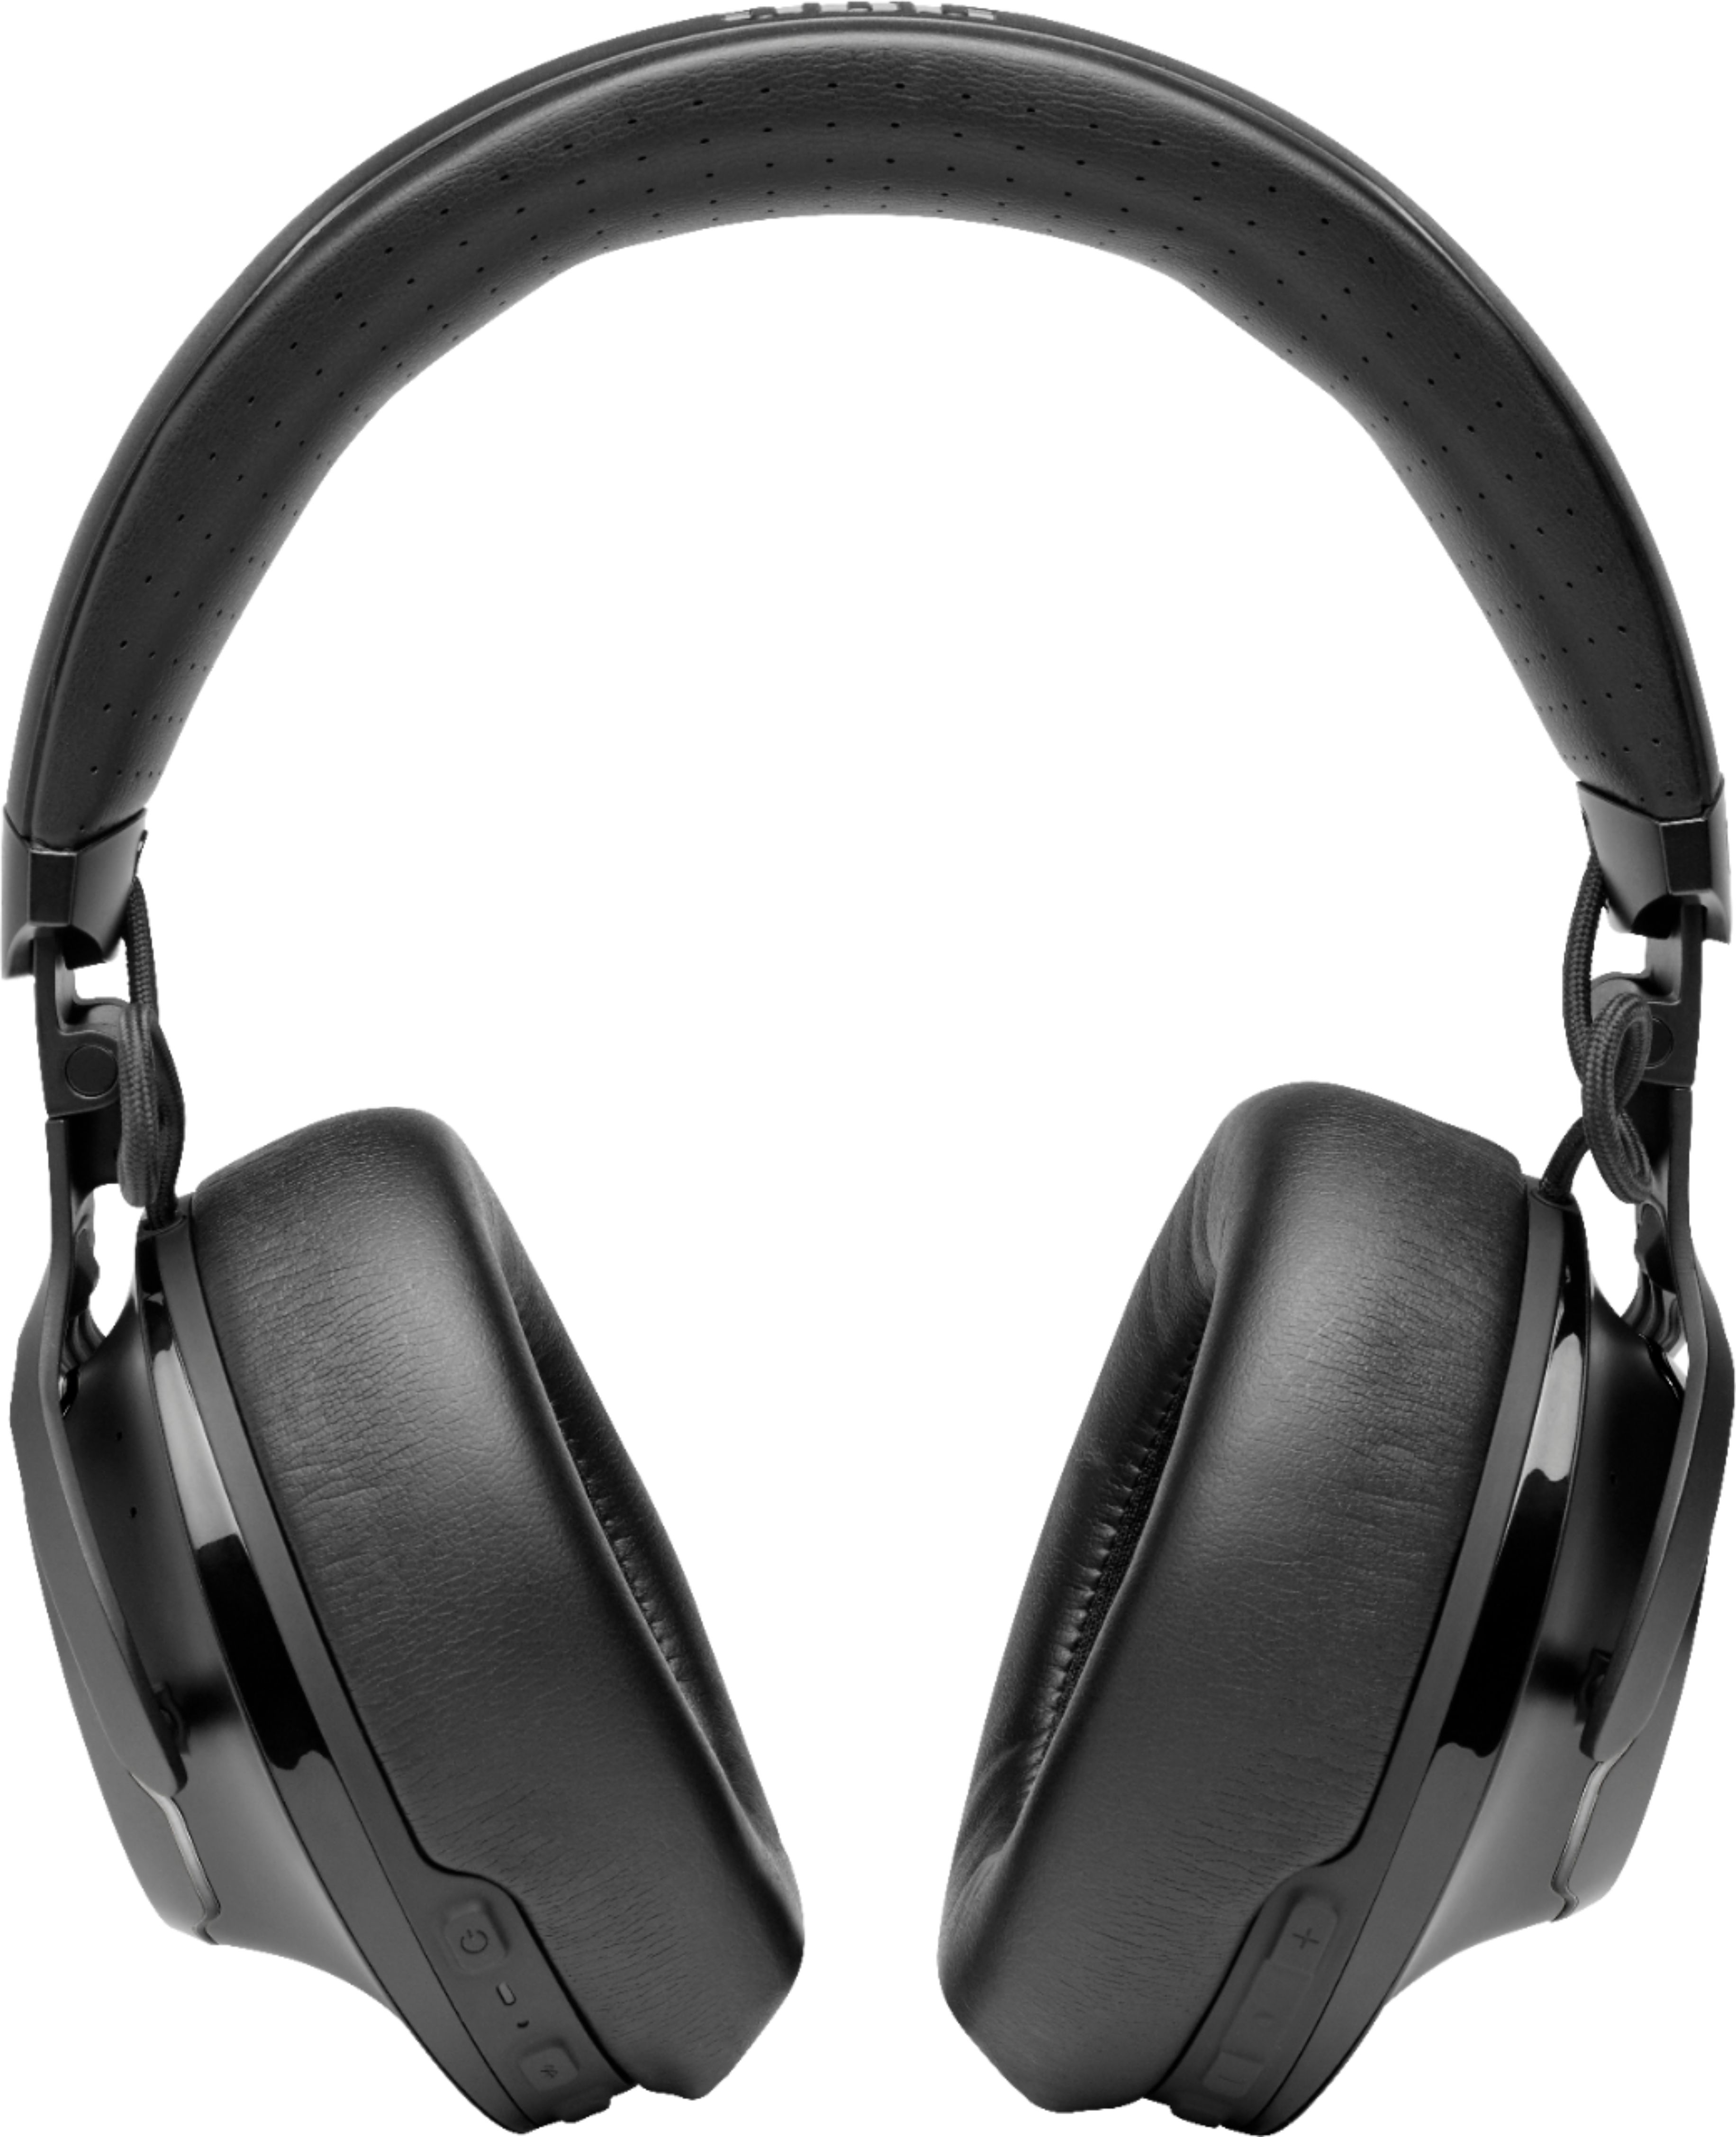 Angle View: JBL - Club 950NC Wireless Noise Cancelling Over-the-Ear Headphones - Black